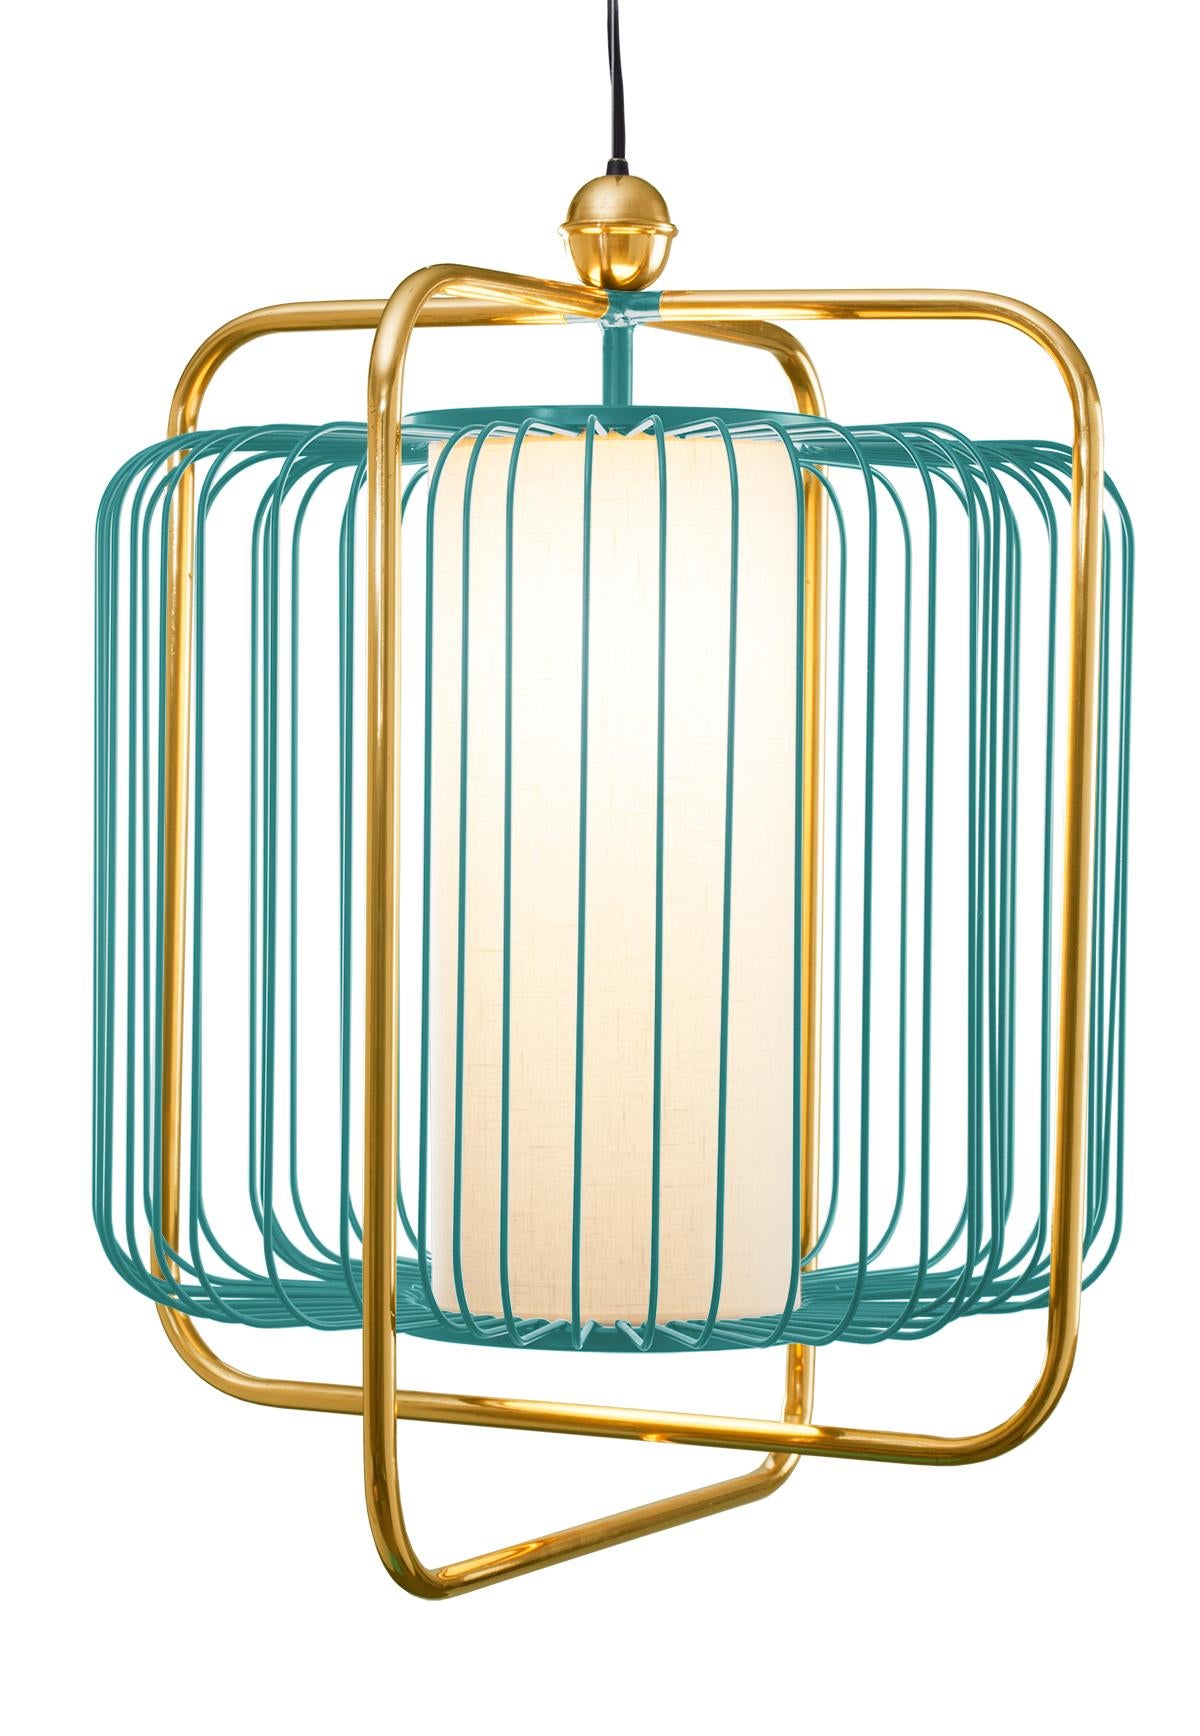 Contemporary Art Deco inspired Jules Pendant Lamp in Brass and Black For Sale 5